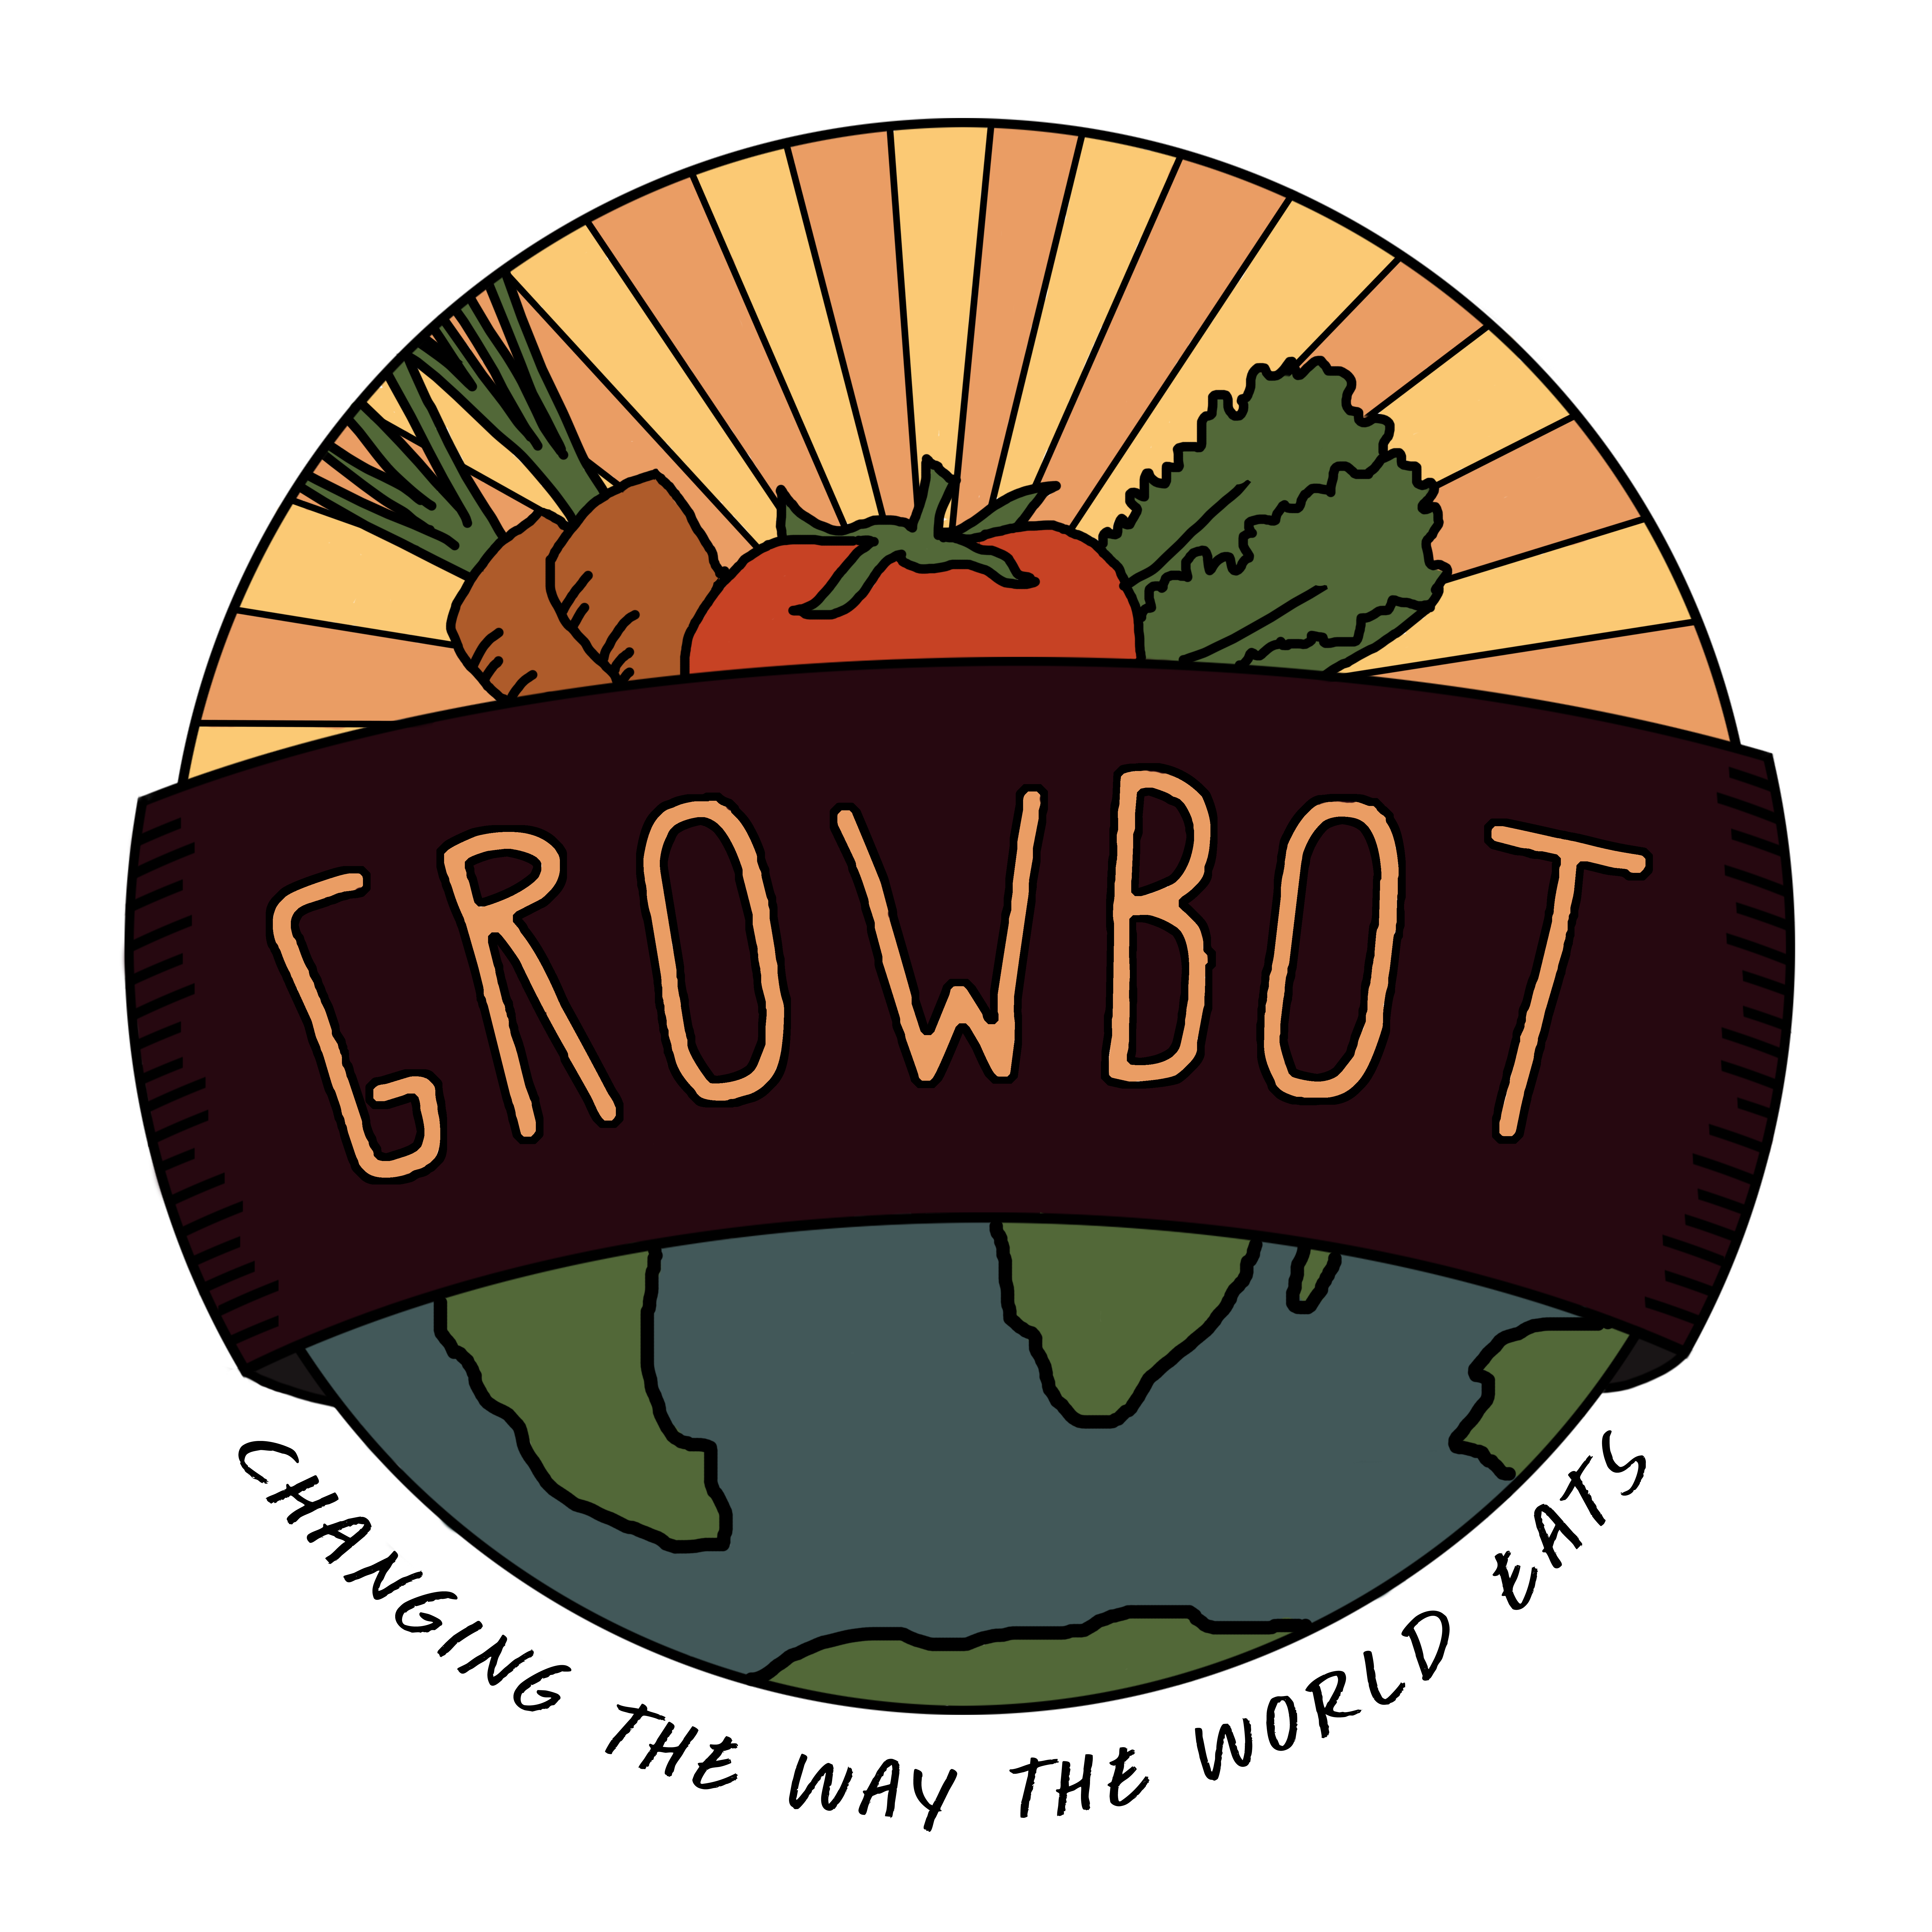 growbot review